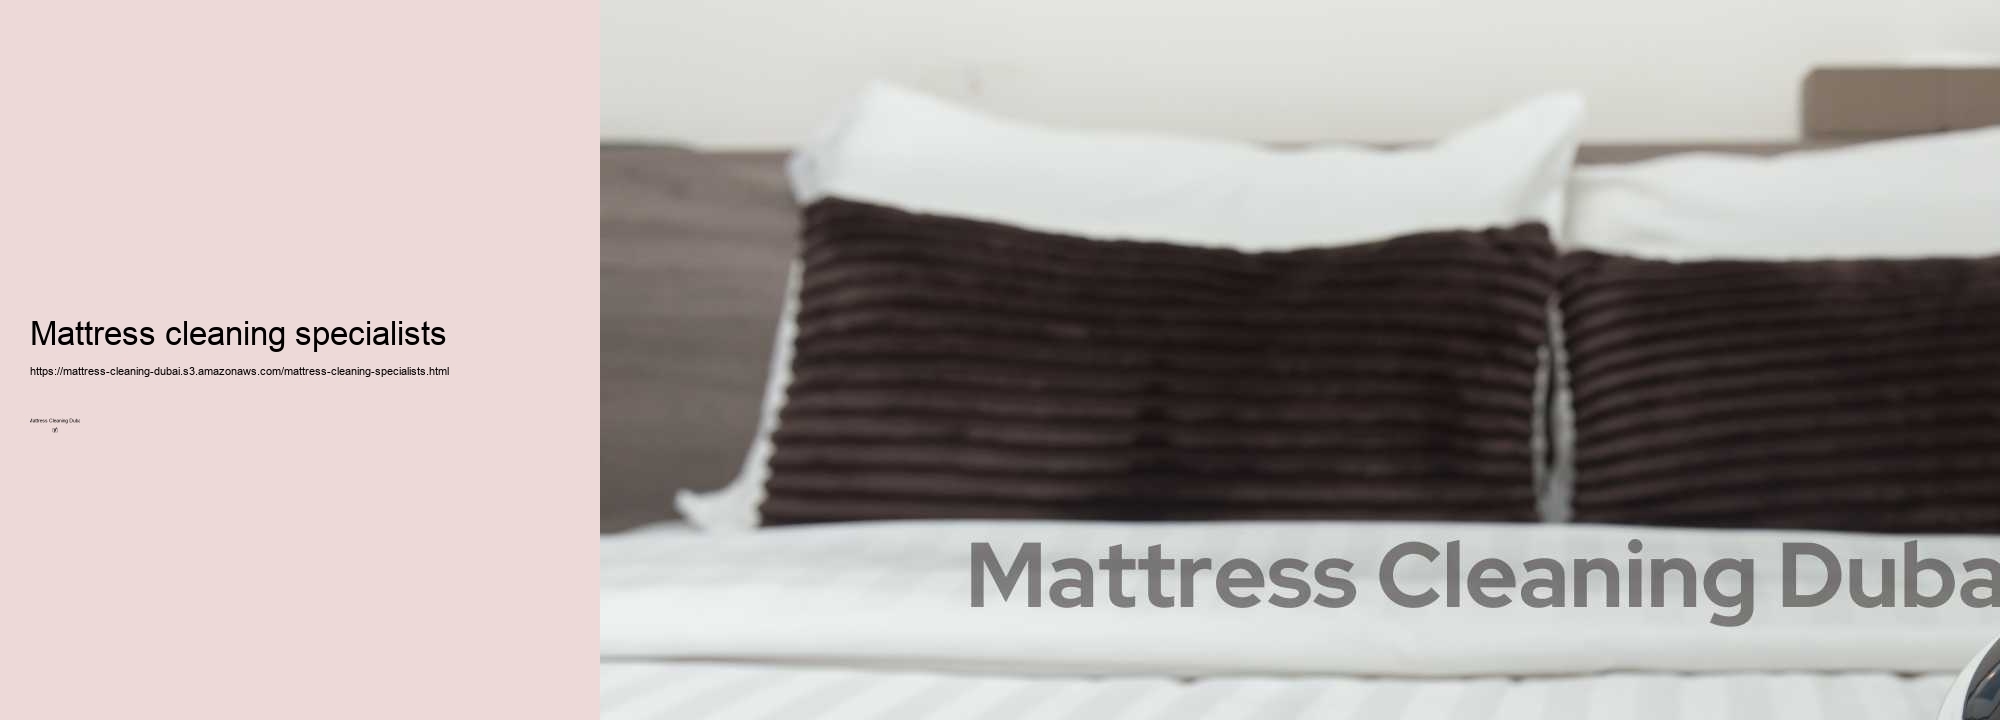 Mattress cleaning specialists